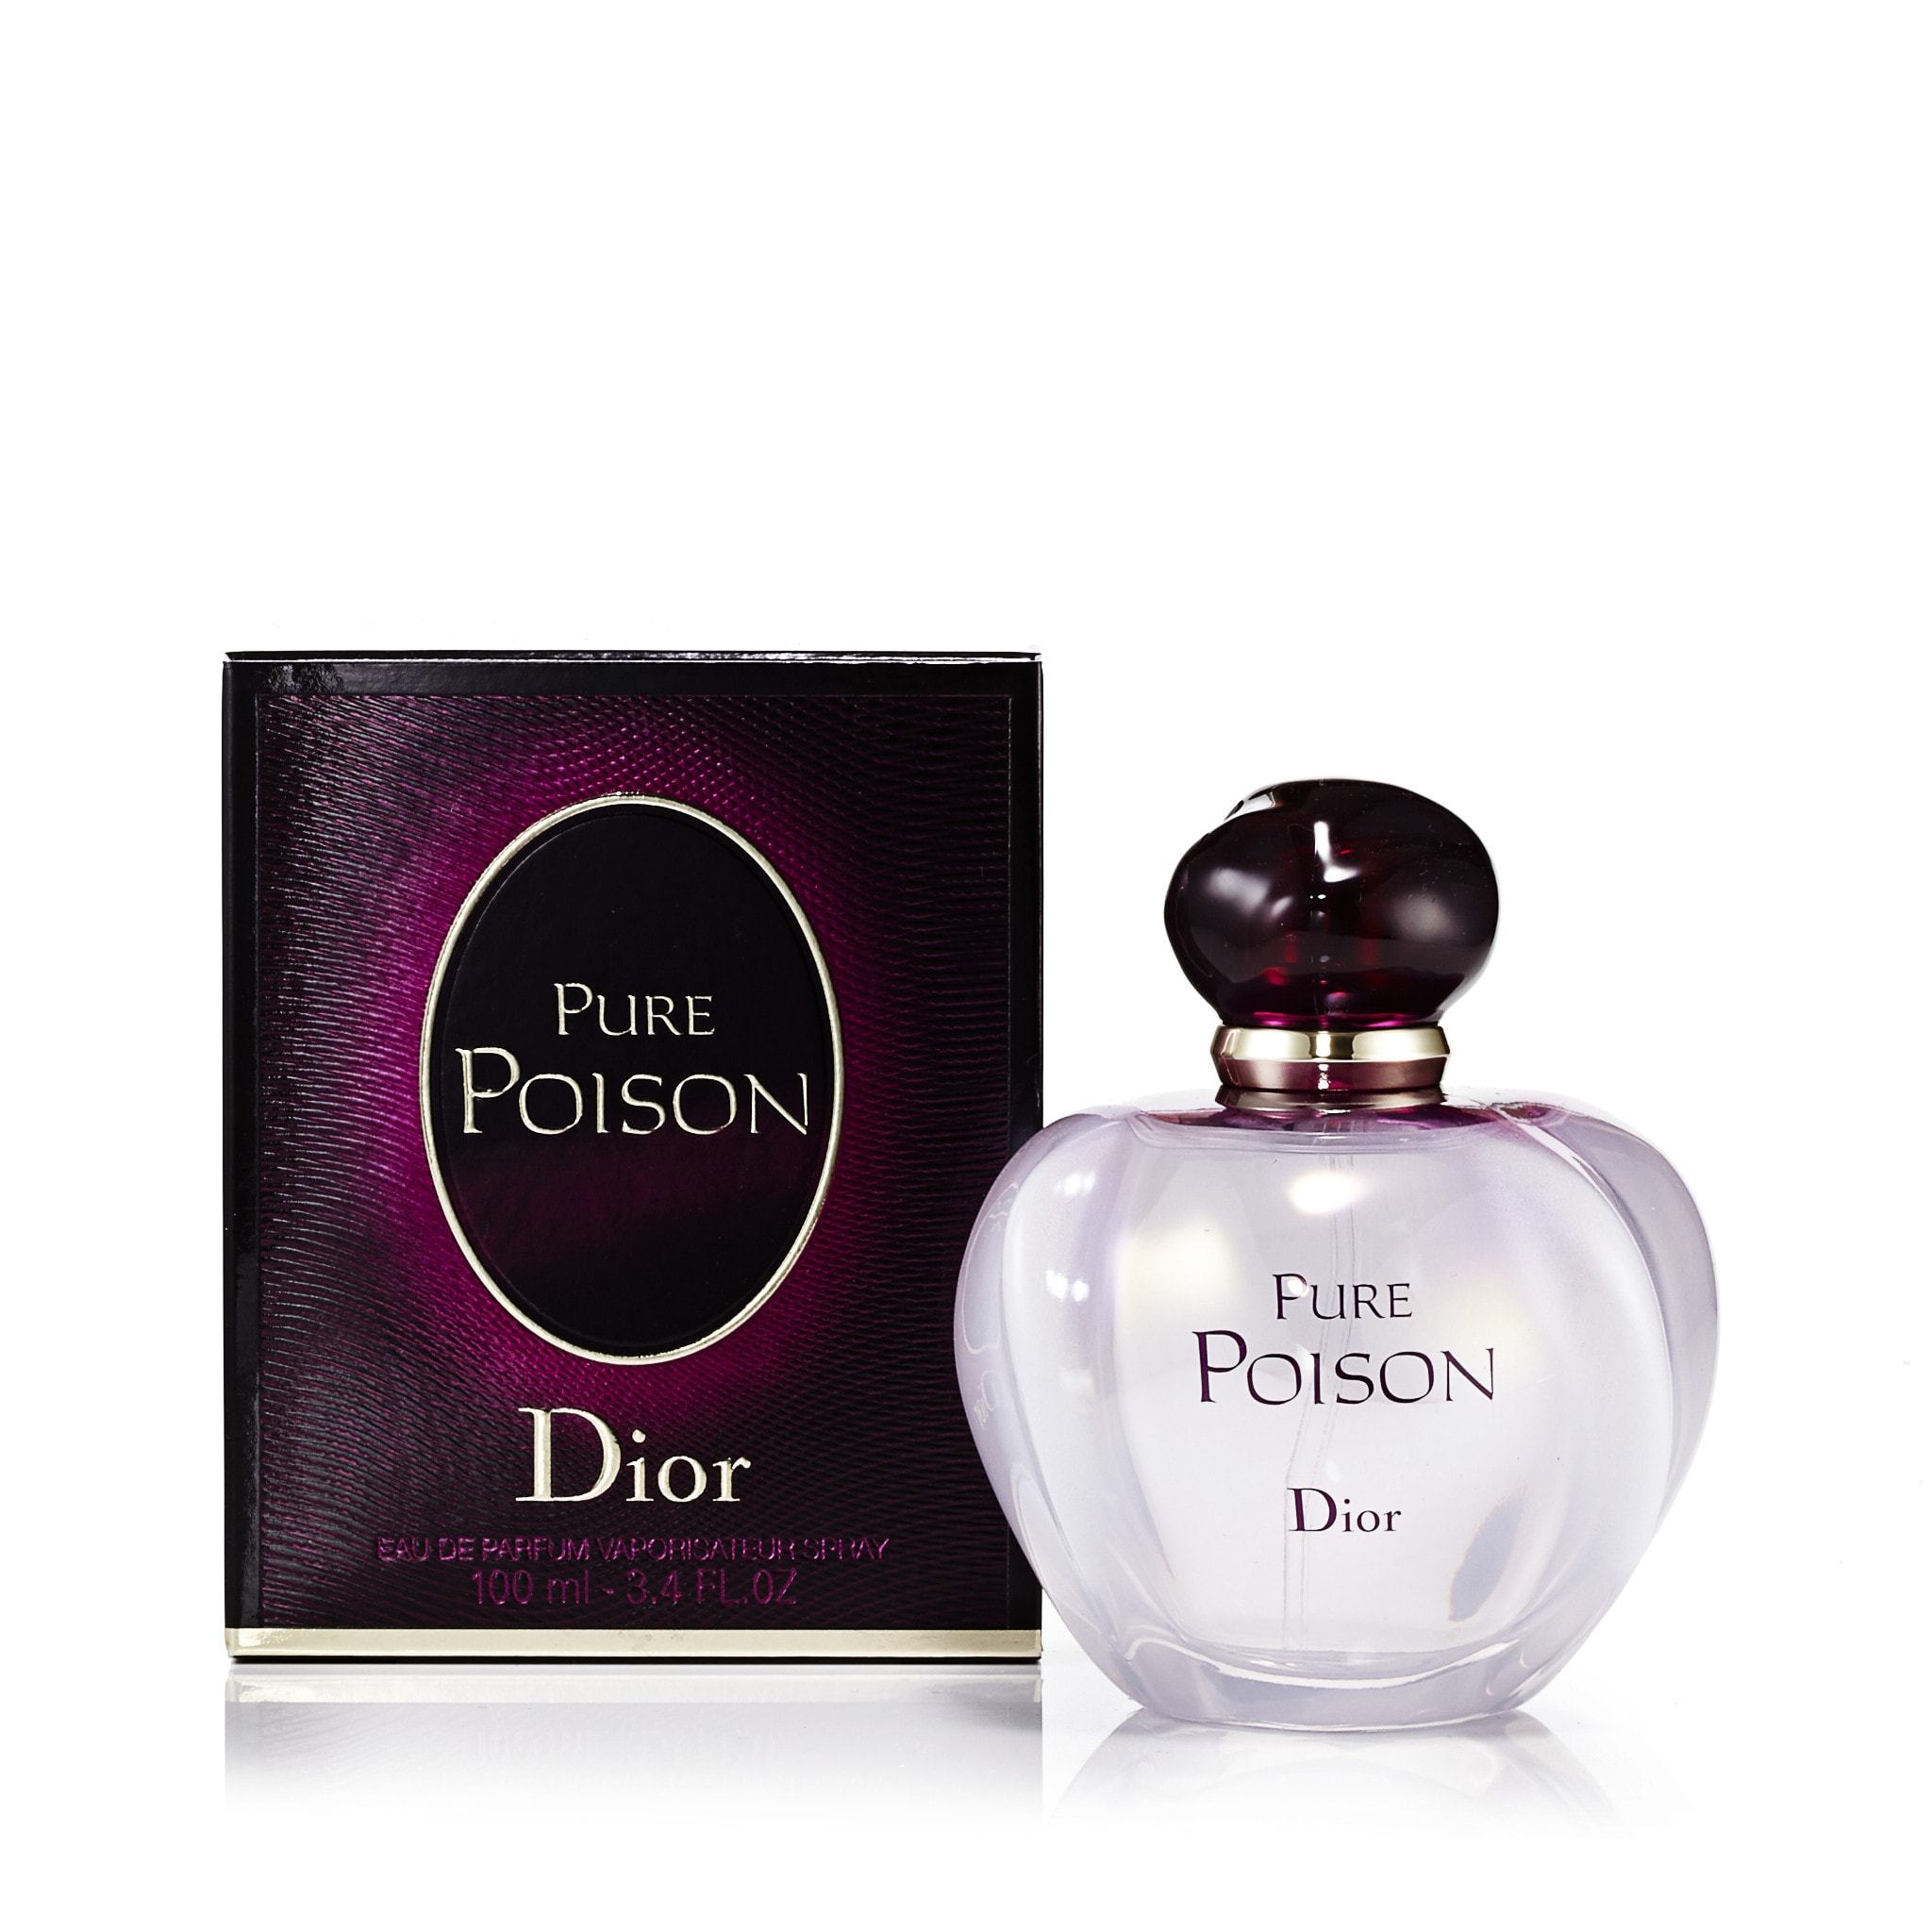 Pure Poison Perfume by Christian Dior for Women